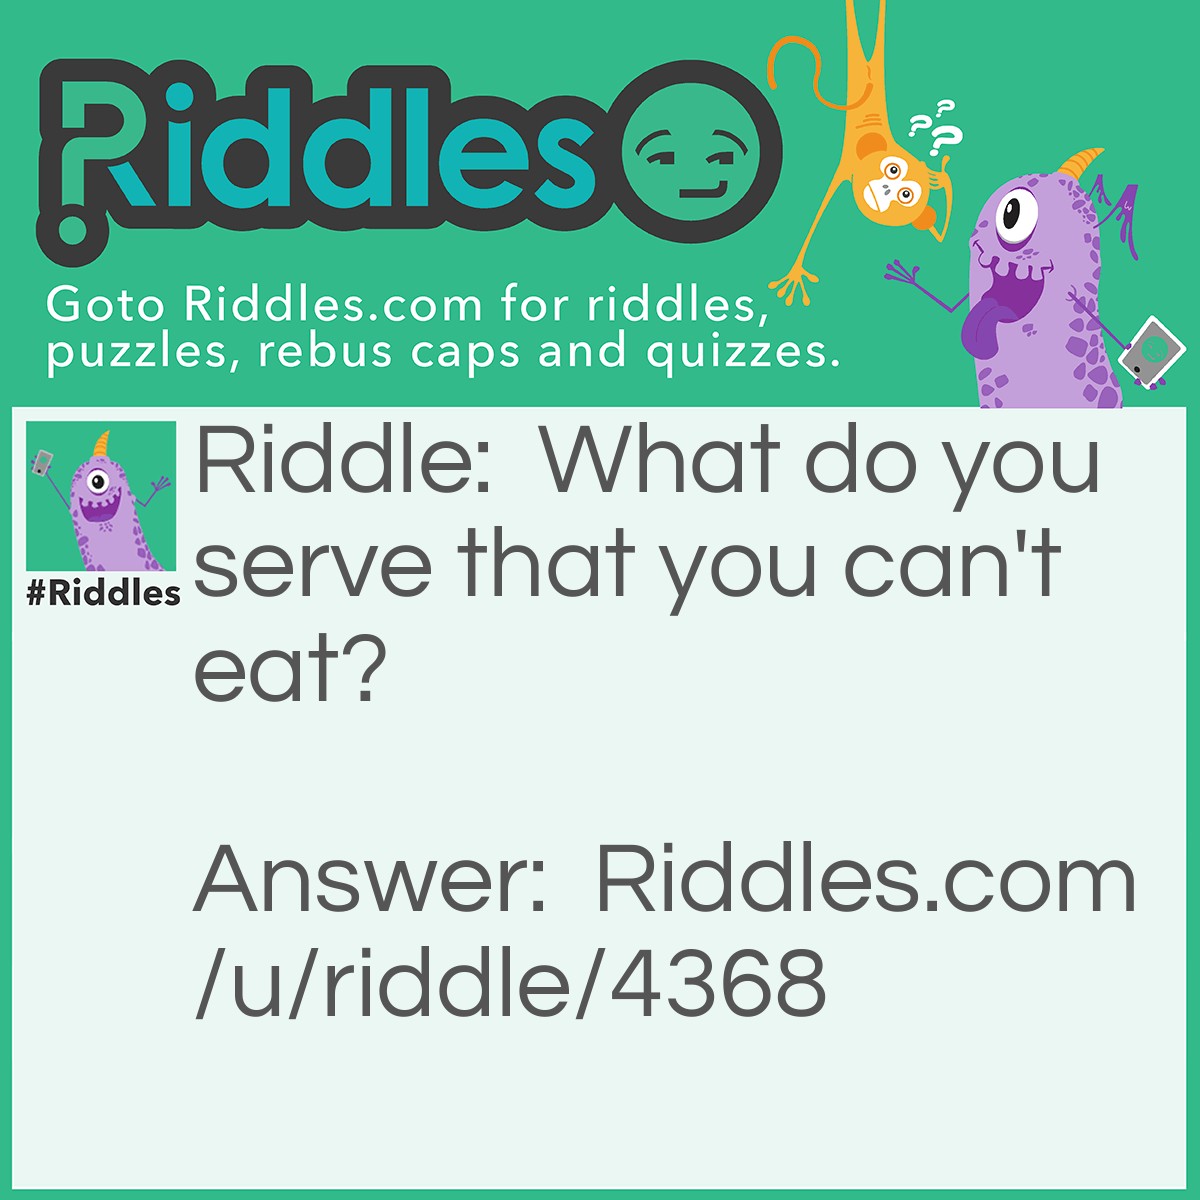 Riddle: What do you serve that you can't eat? Answer: Justice or a prison sentence.